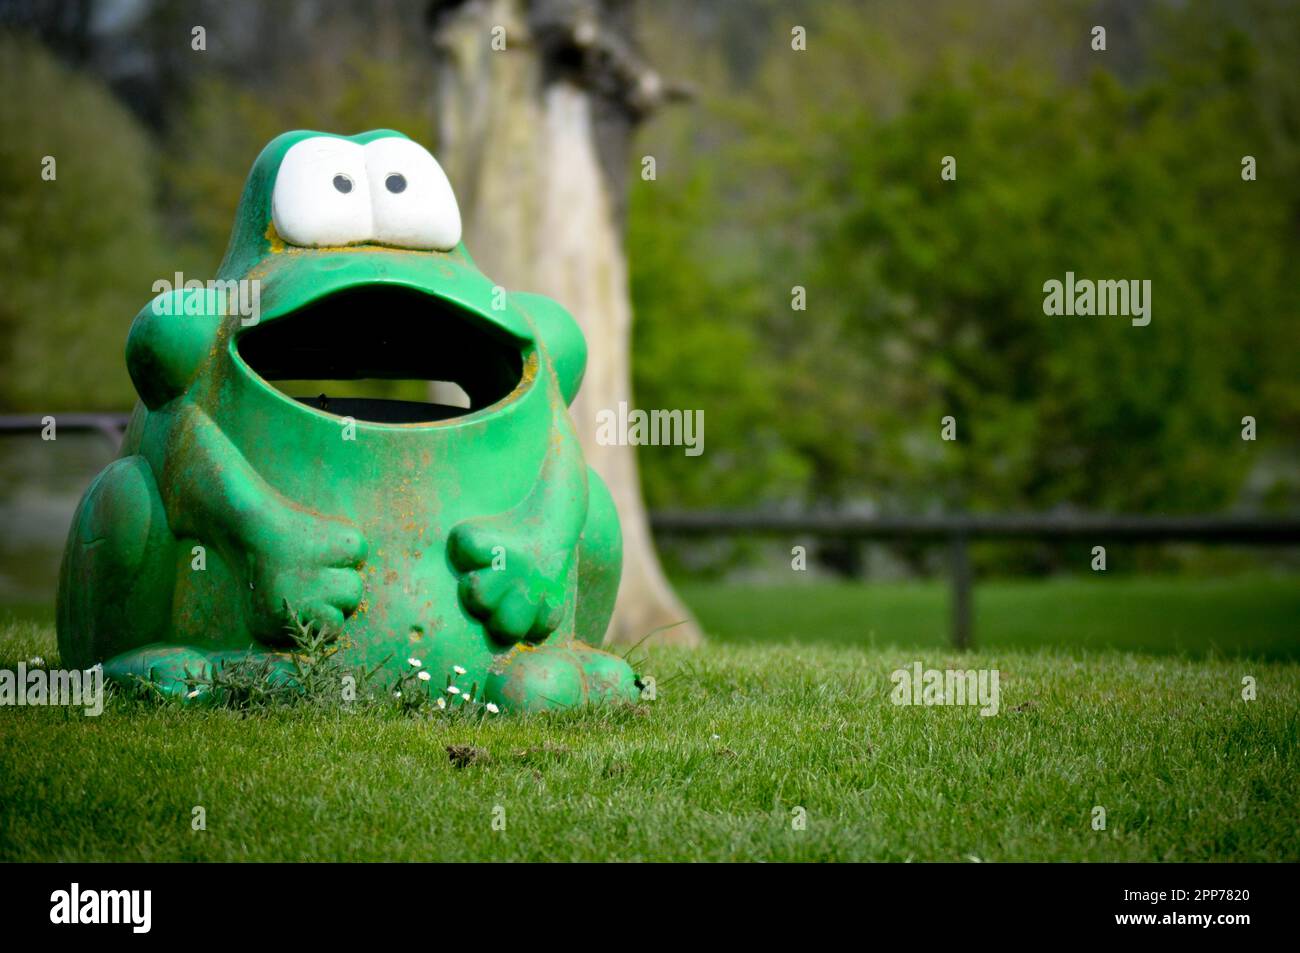 A well weathered, comical green frog shaped plastic rubbish bin in a play park, England Stock Photo